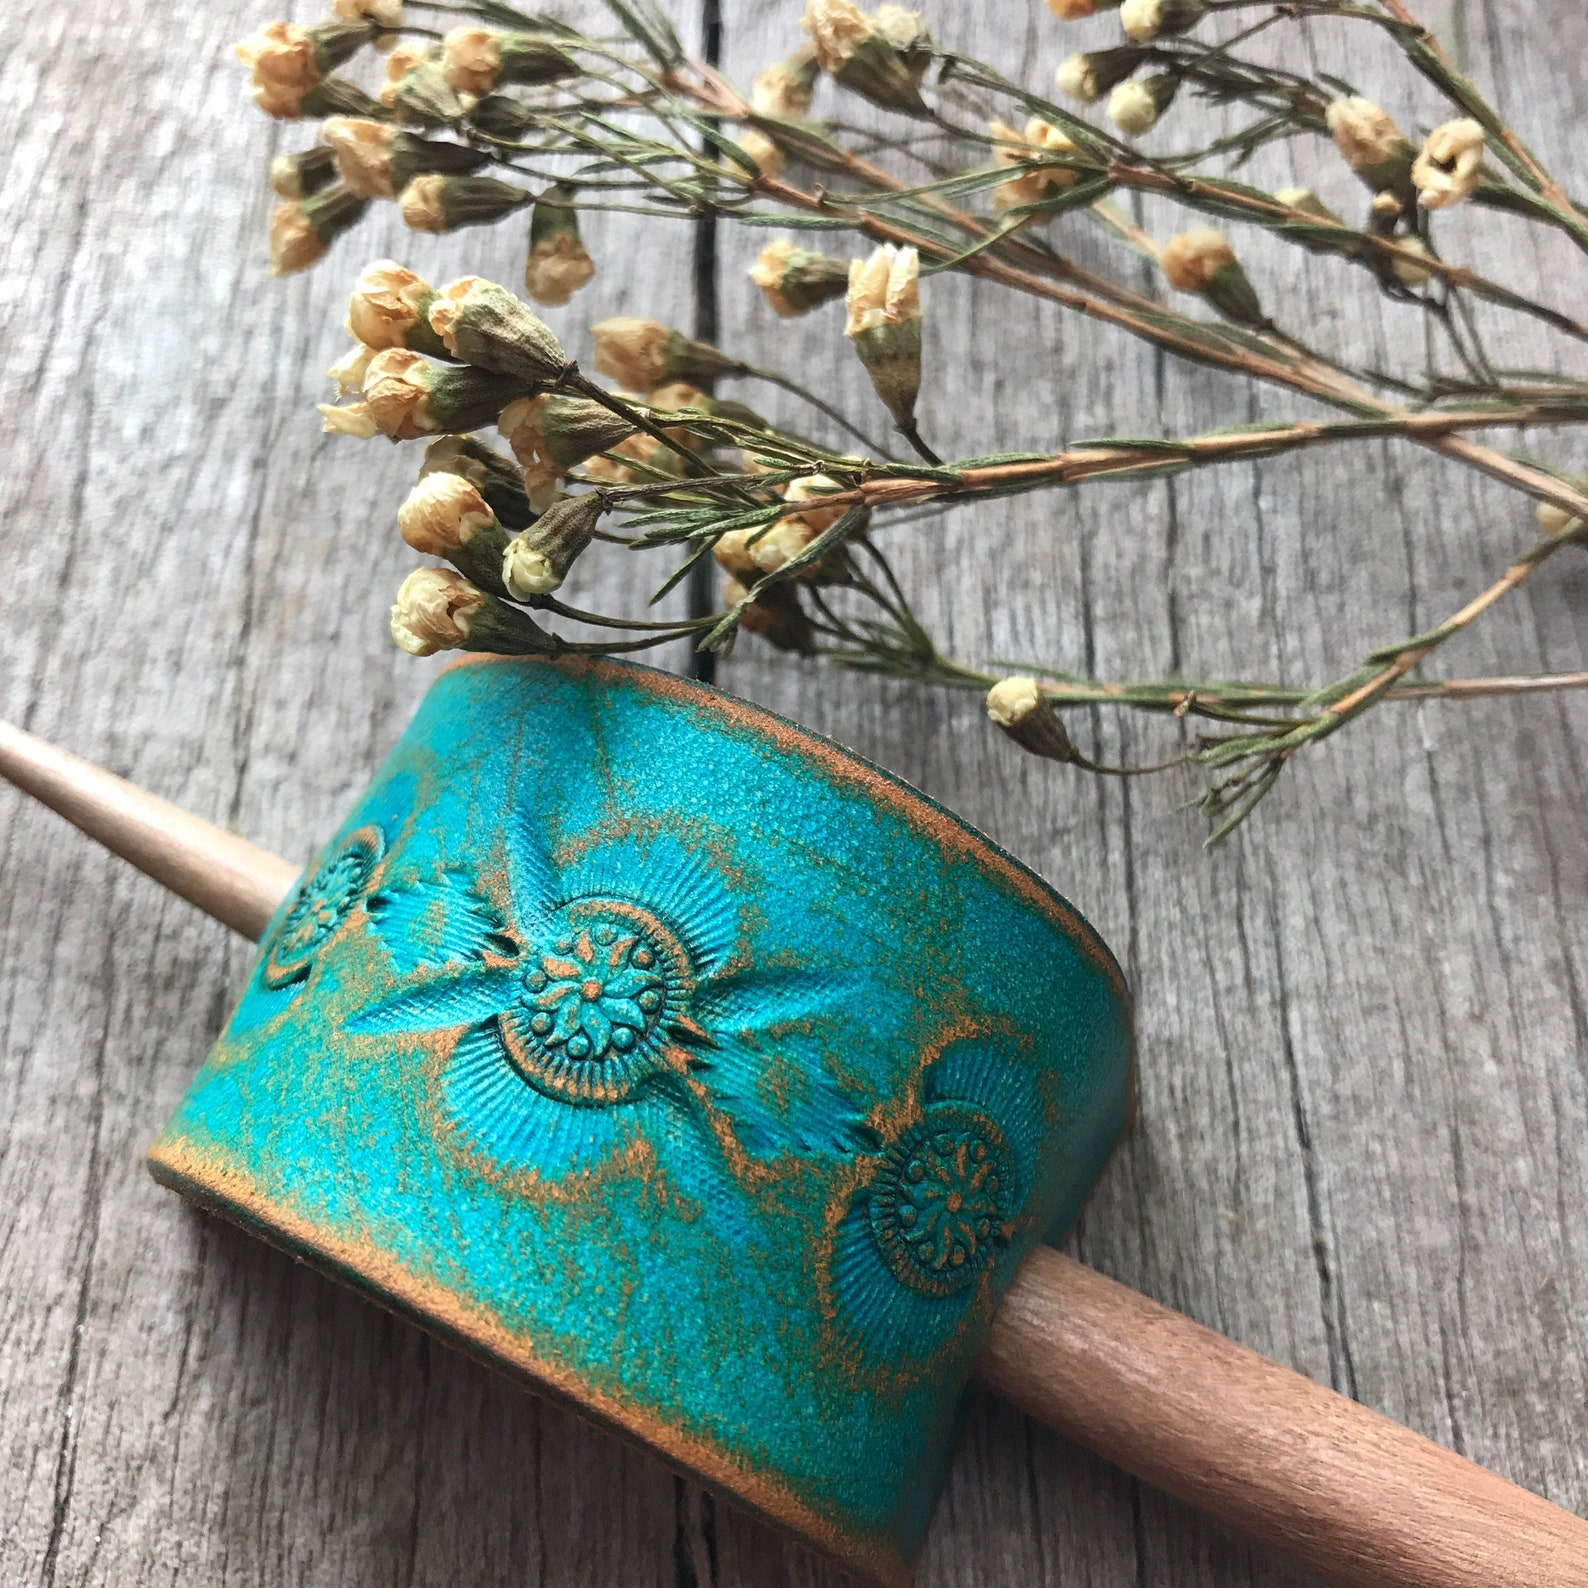 Hand Tooled Leather Hair Slide Barrette Turquoise and Caramel - Etsy